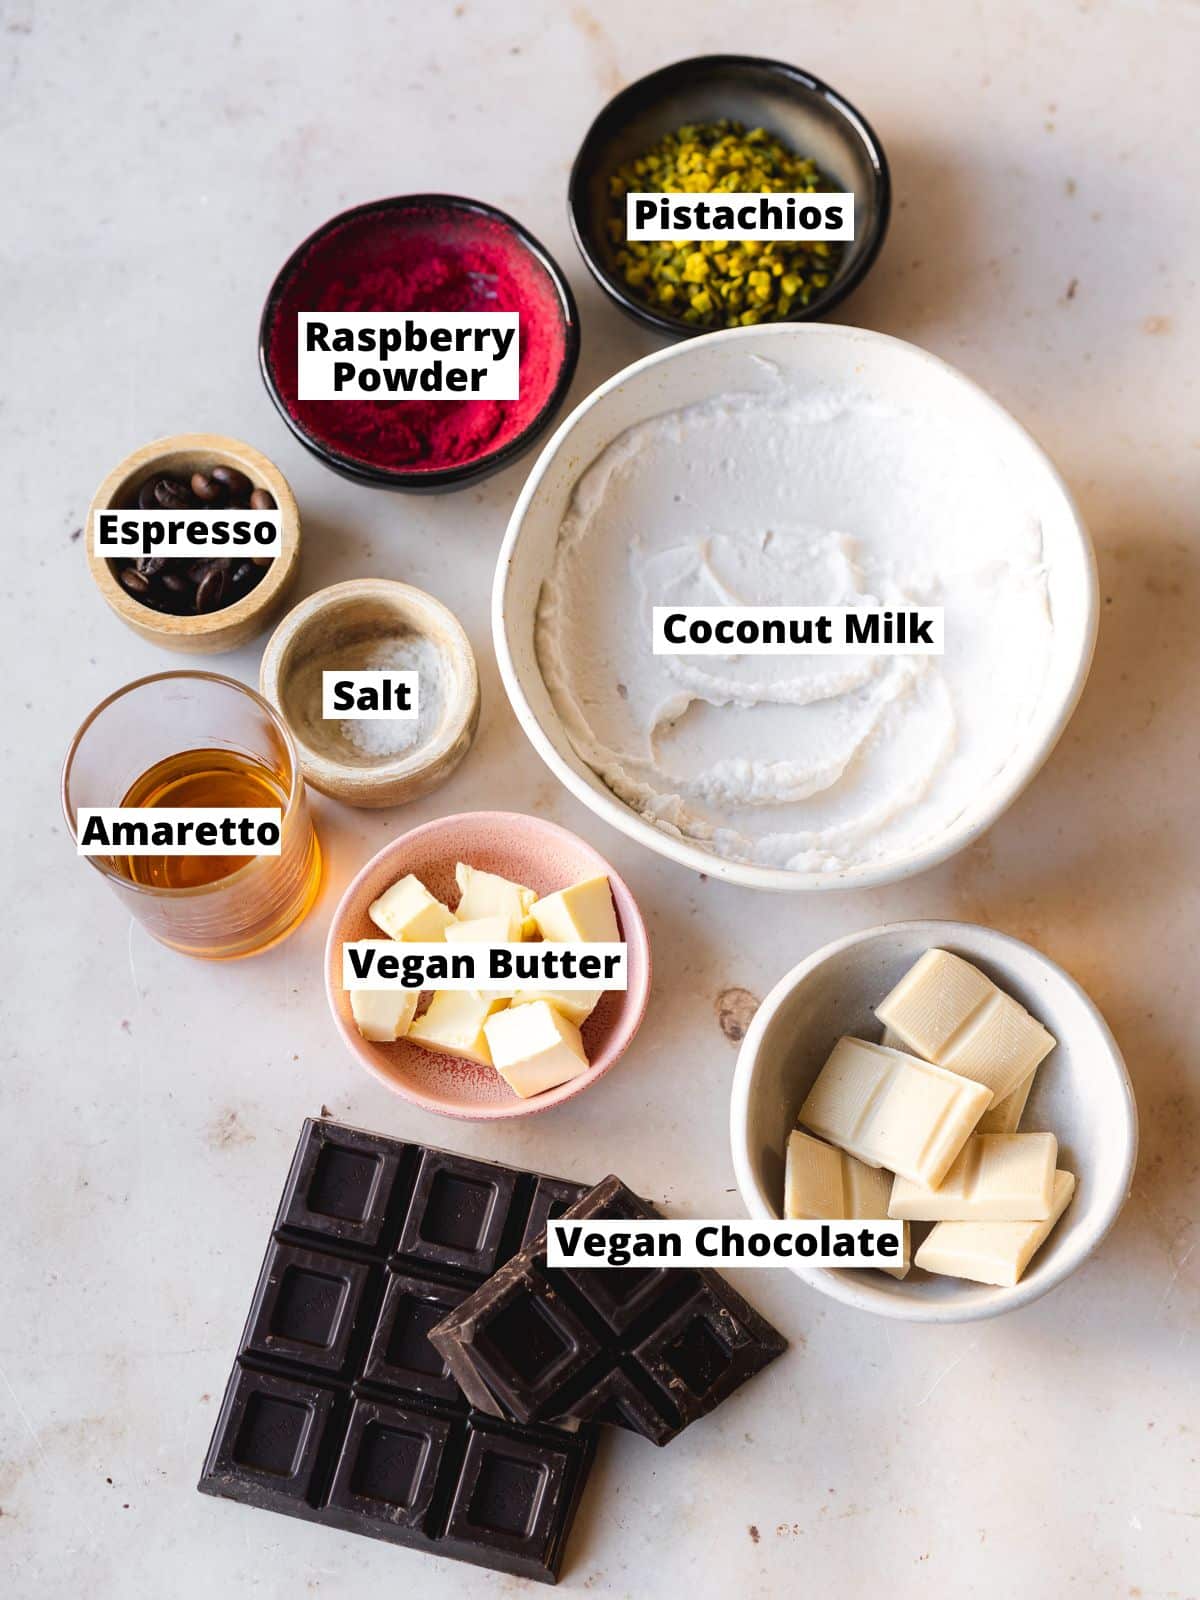 ingredients for chocolate truffles measured out in bowls.